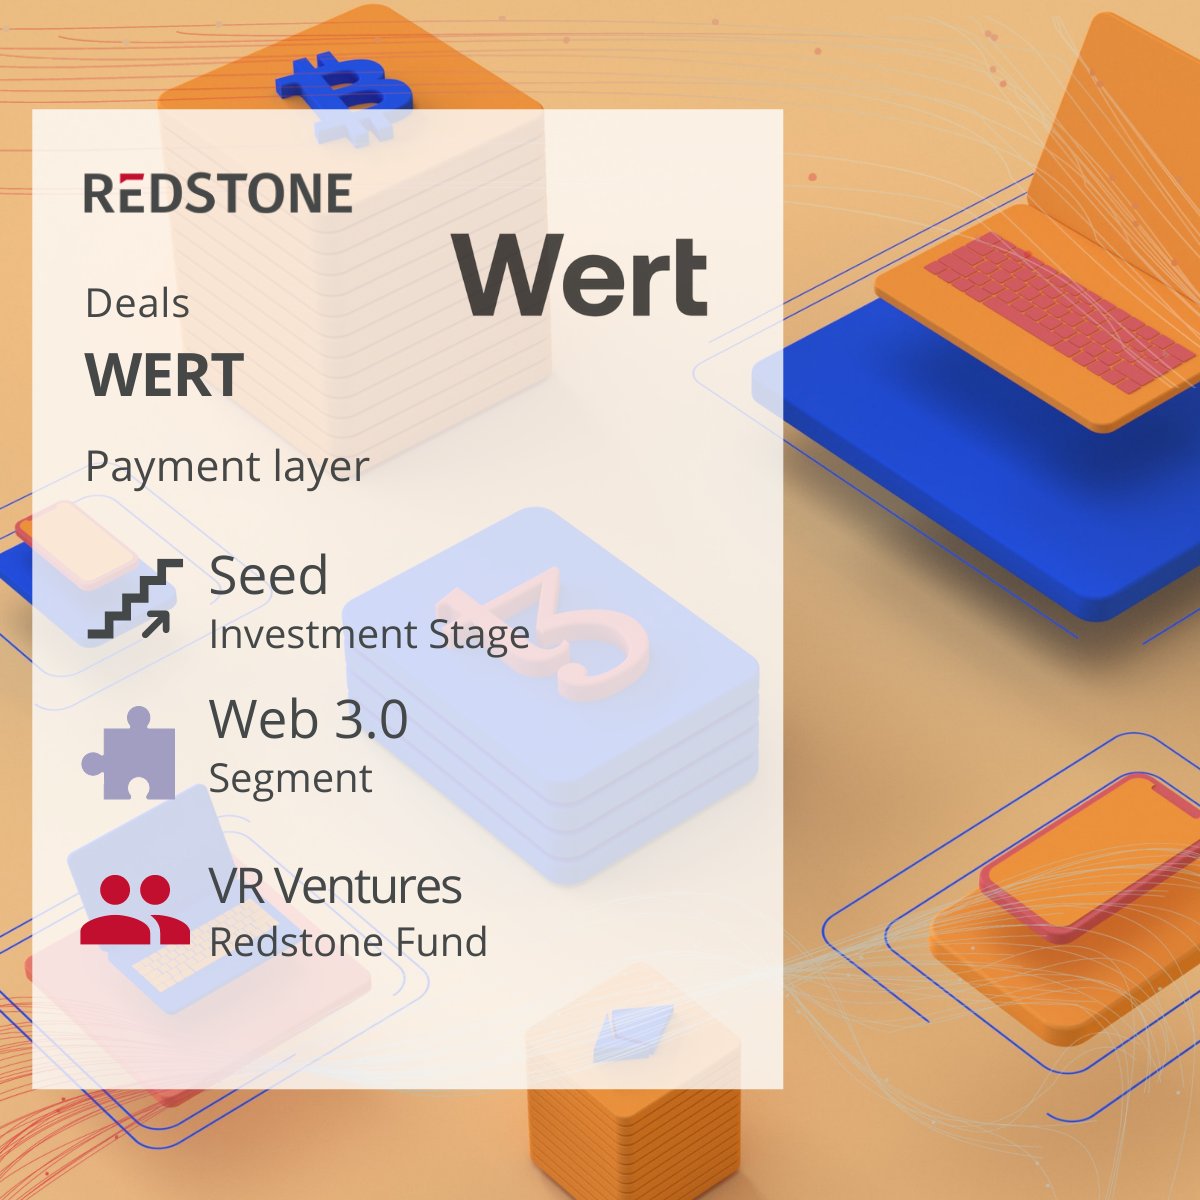 We are proud to announce that @wert_io is the newest member of the VR Ventures Portfolio. With its payment layer, the Estonian financial service provider makes it possible to directly purchase NFTs with credit cards. #VentureCapital #NFT #Crypto #investment #Portfolio